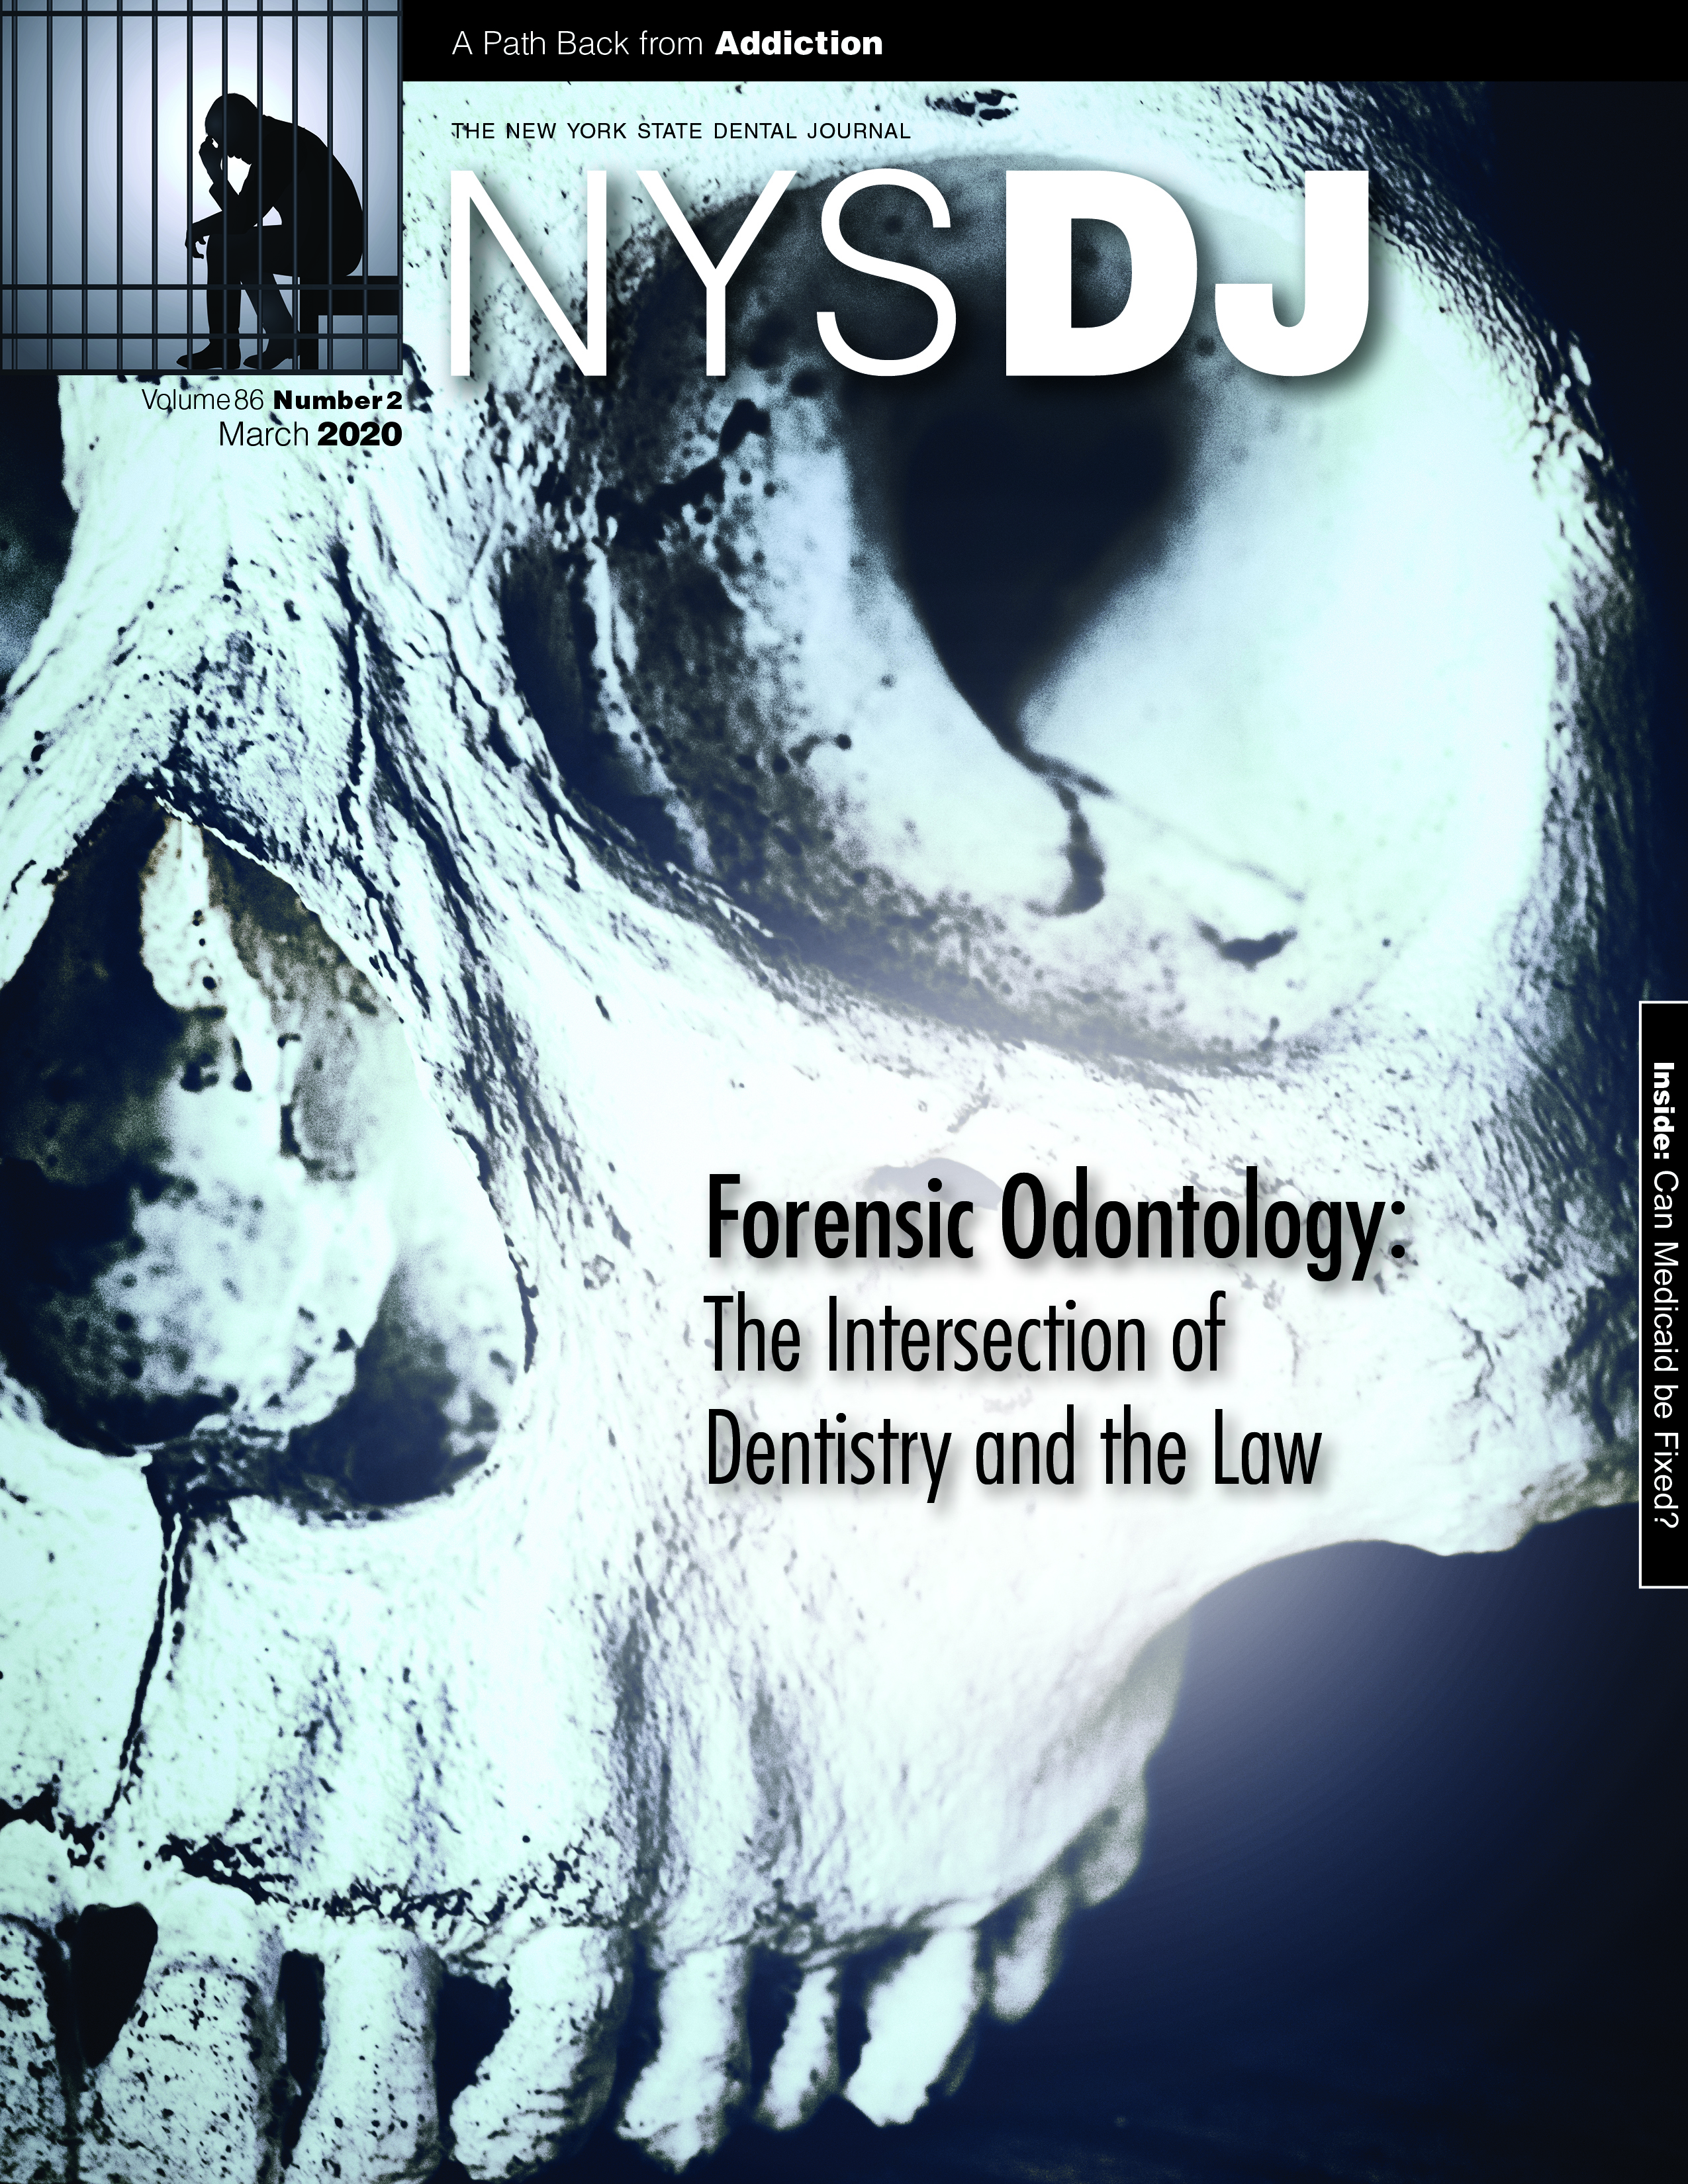 Cover of the NYSDJ with a close up view of a weathered human skull